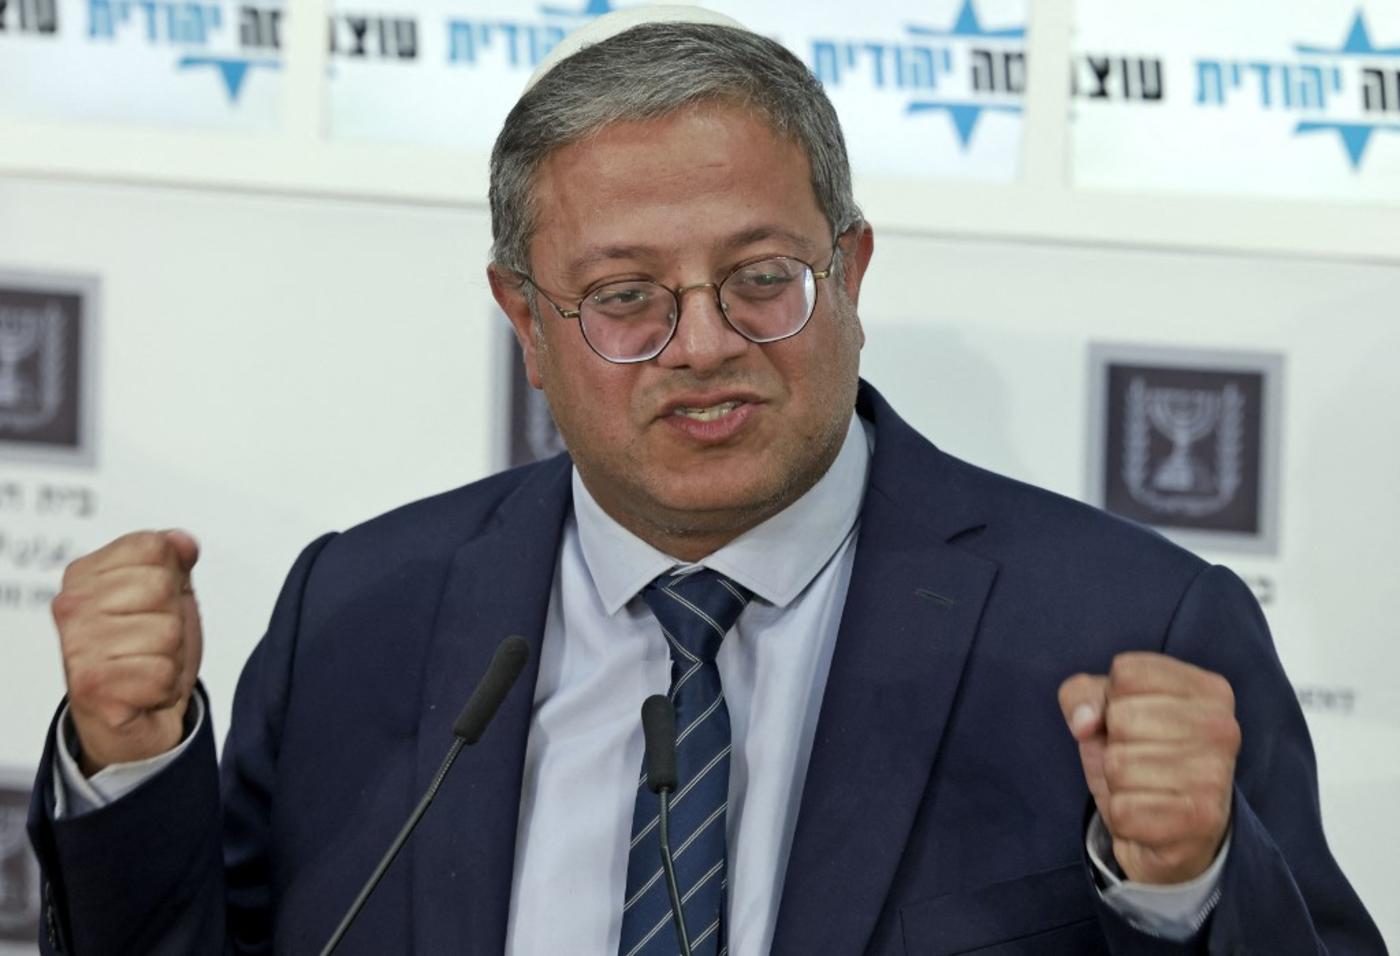 Itamar Ben-Gvir speaks during parliamentary consultations with parties elected in the 25th Knesset, at the Presidential Residence in Jerusalem on 10 November 2022 (AFP)